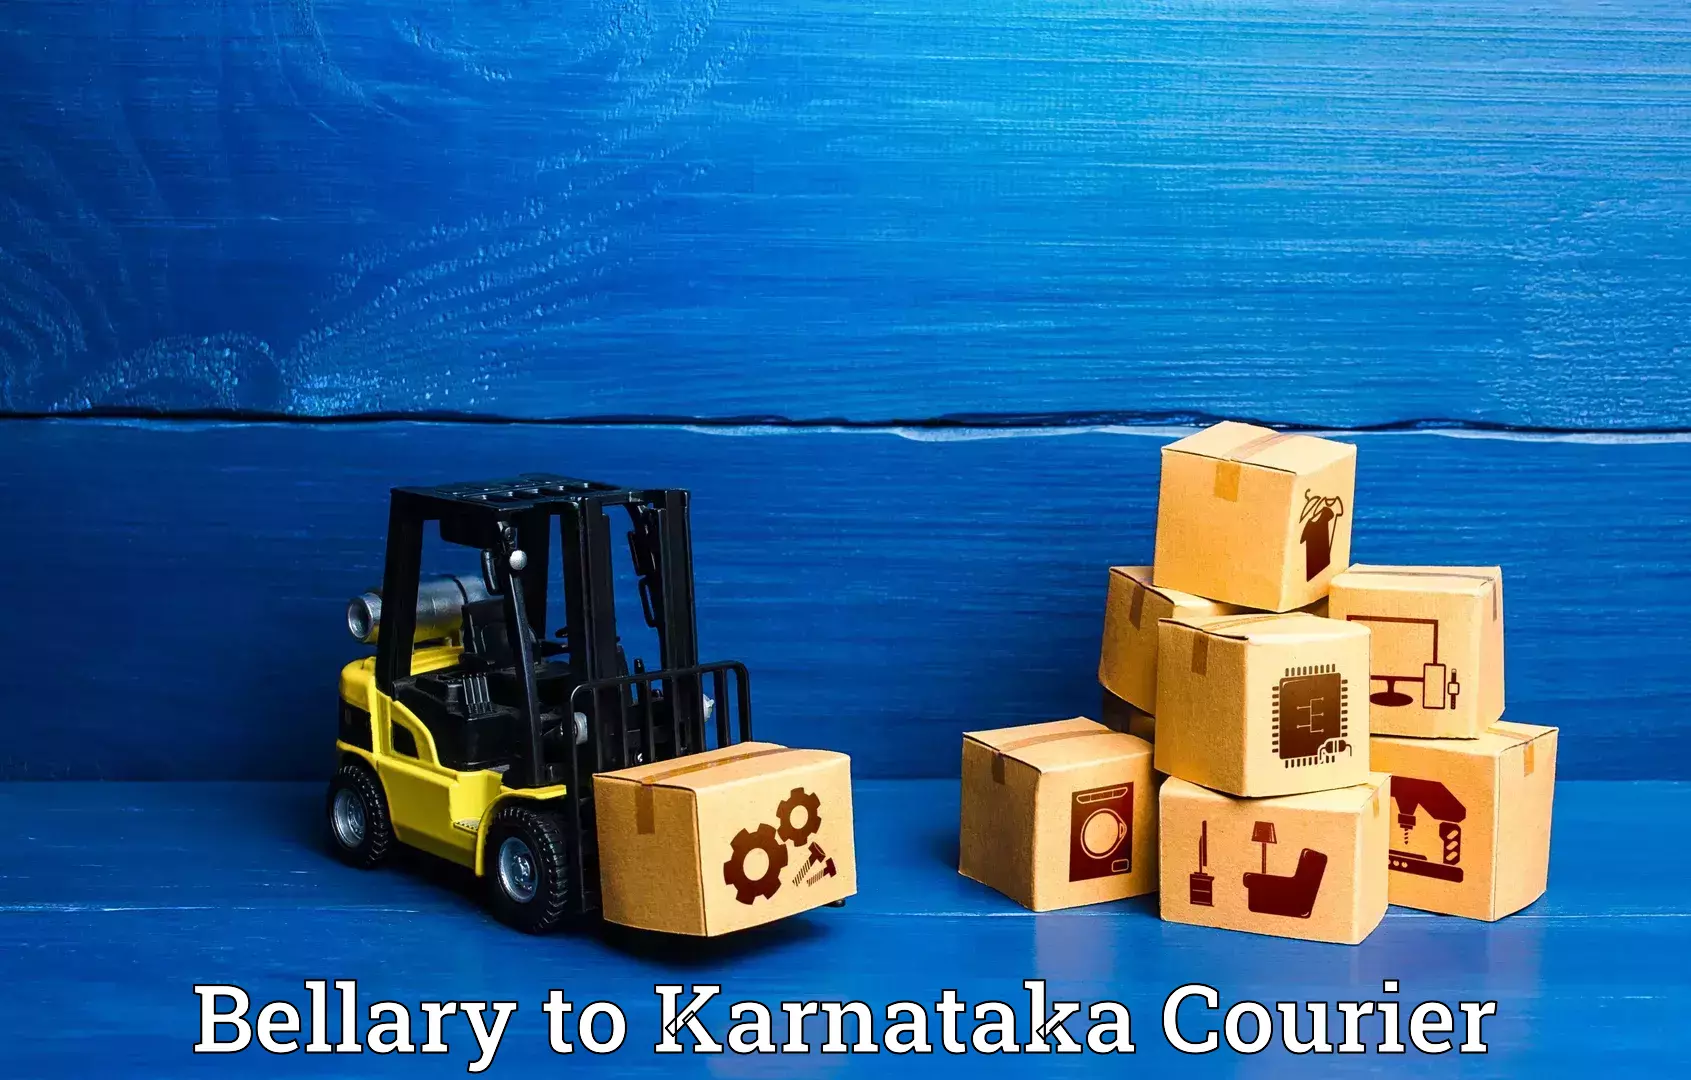 Luggage shipment specialists Bellary to Mulbagal